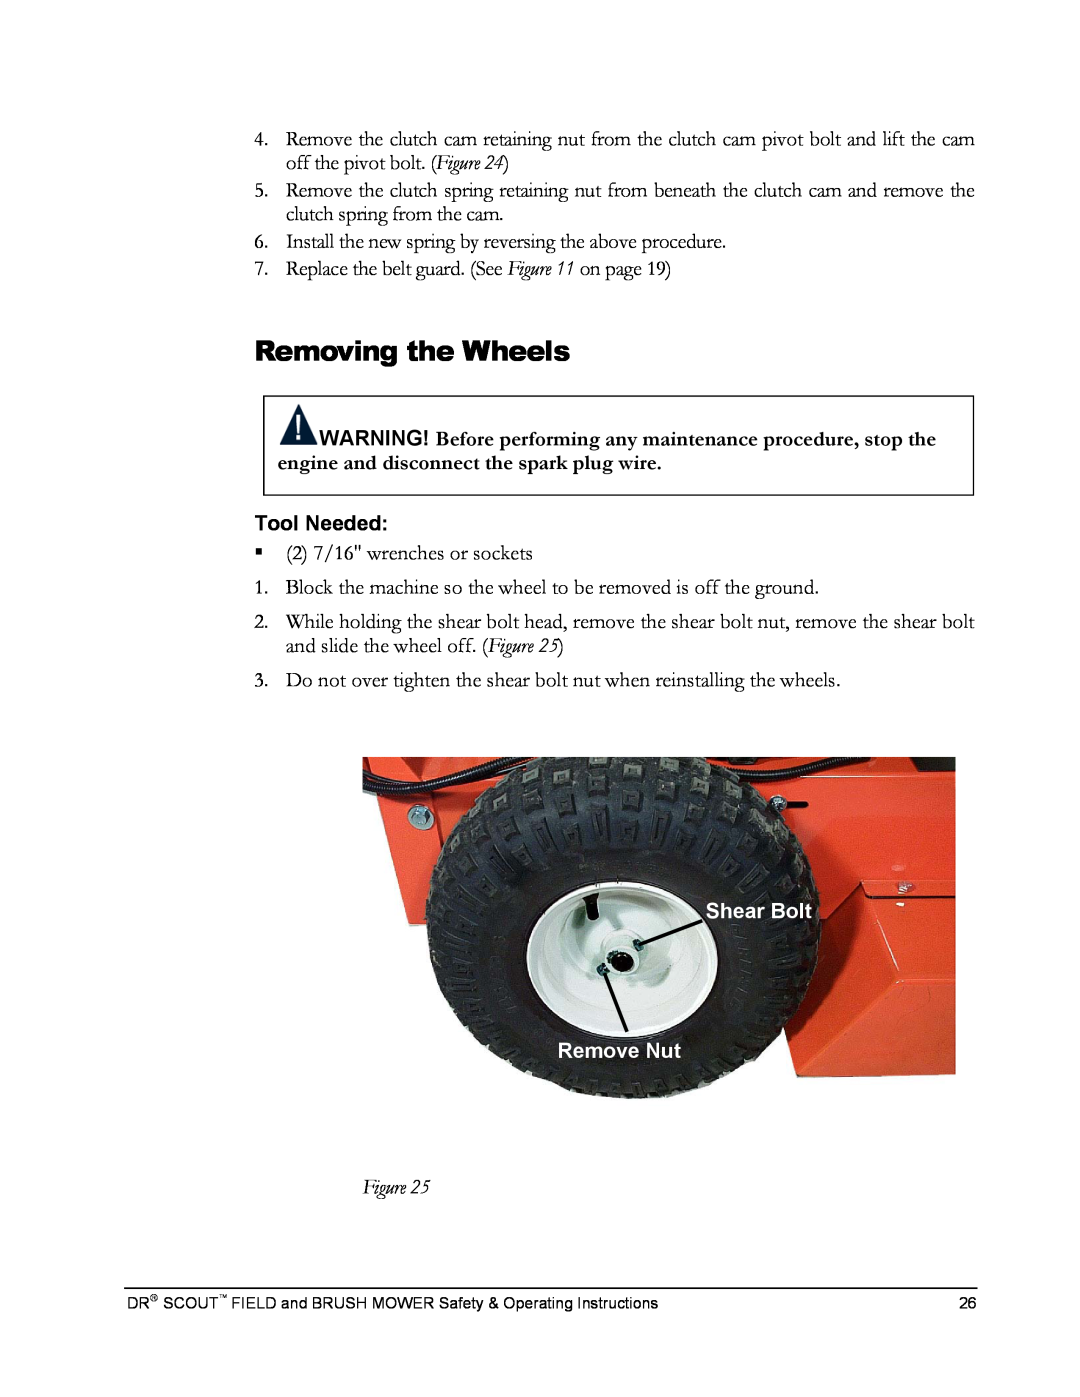 Country Home Products DR SCOUT FIELD and BRUSH MOWER manual Removing the Wheels, Shear Bolt Remove Nut 